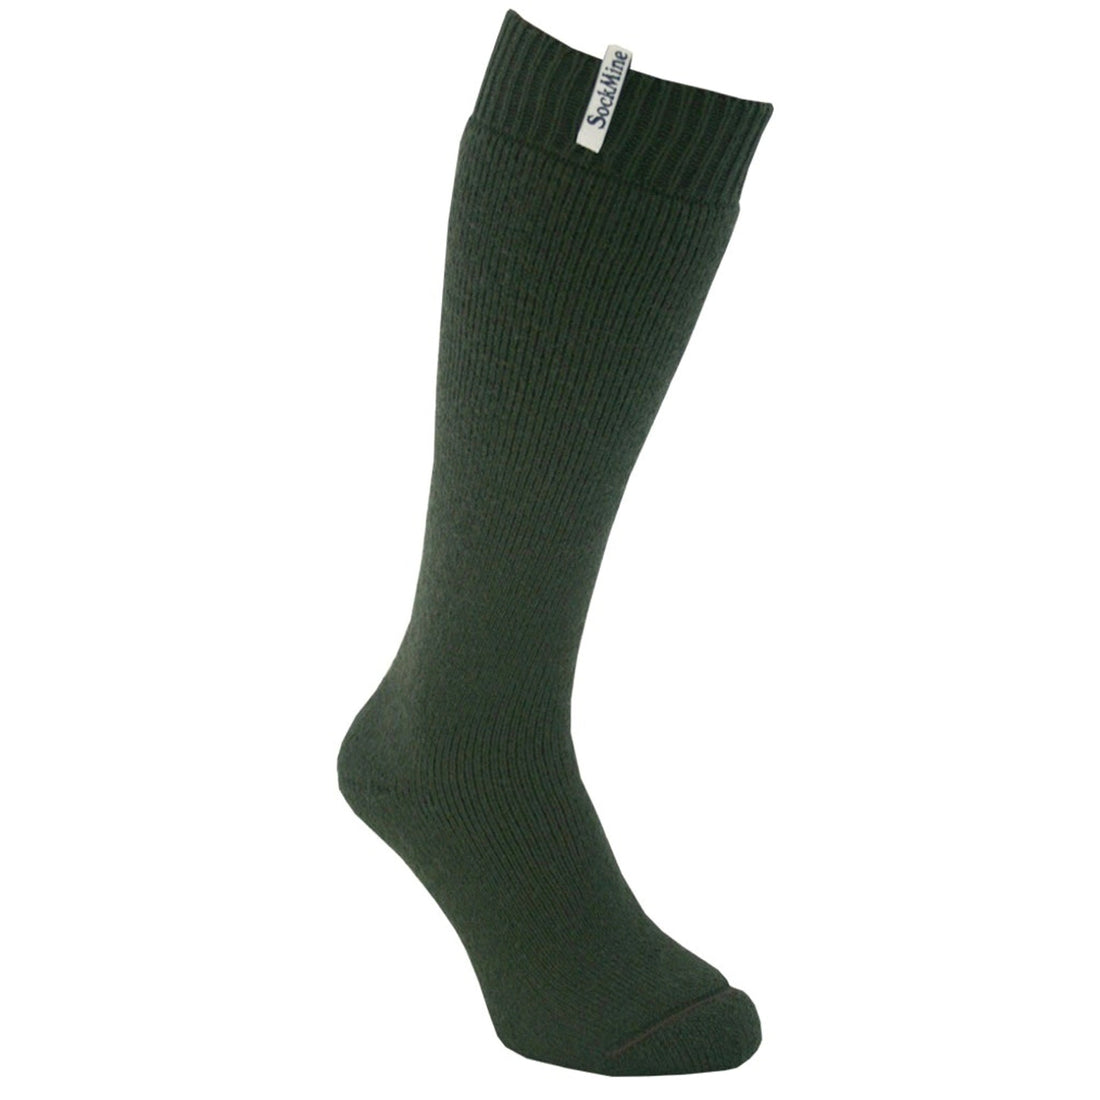 Adults Welly Sock - Moss Green